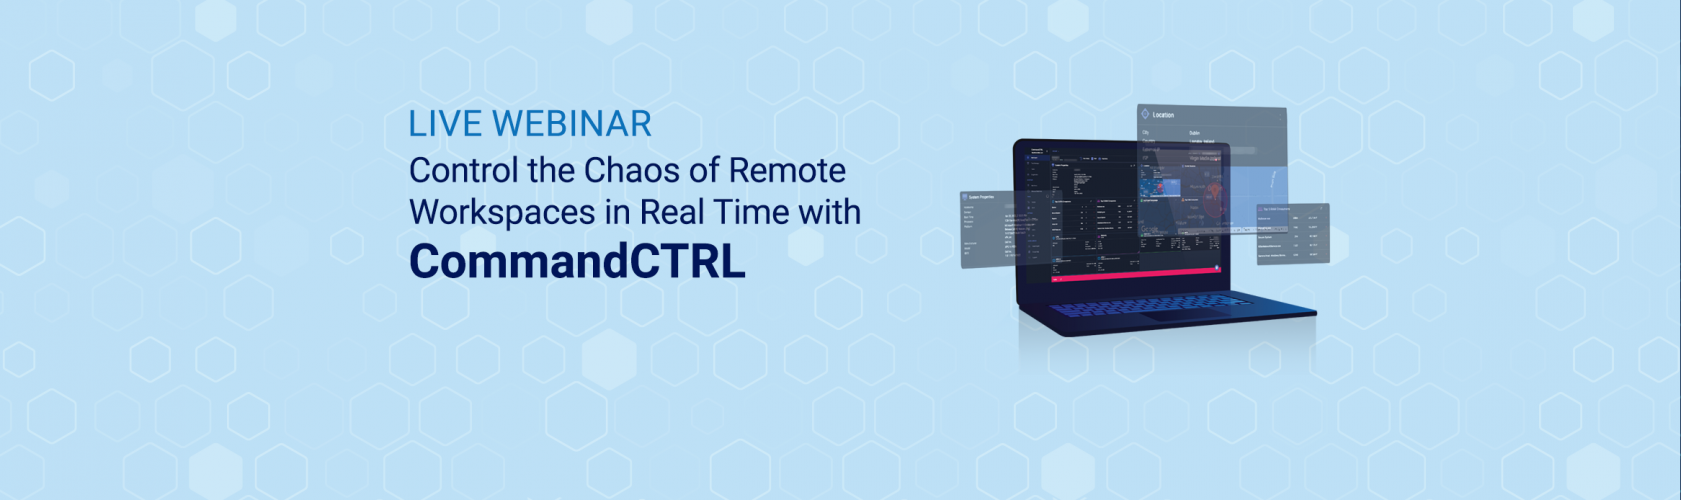 Webinar — Control the Chaos of Remote Workspaces in Real Time with CommandCTRL